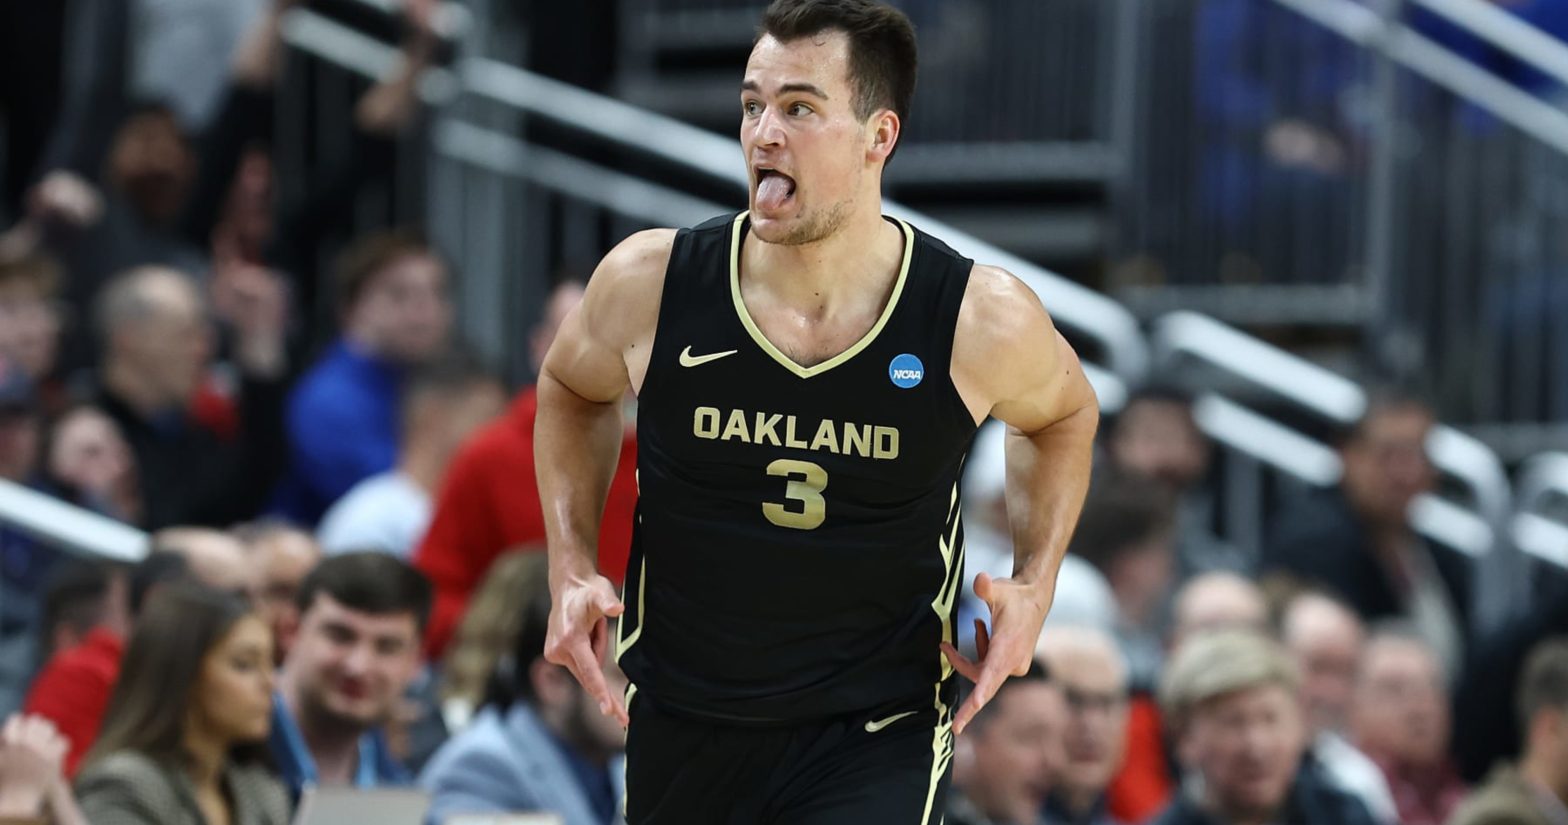 Oakland’s Jack Gohlke Becomes March Madness Icon in Upset of Kentucky